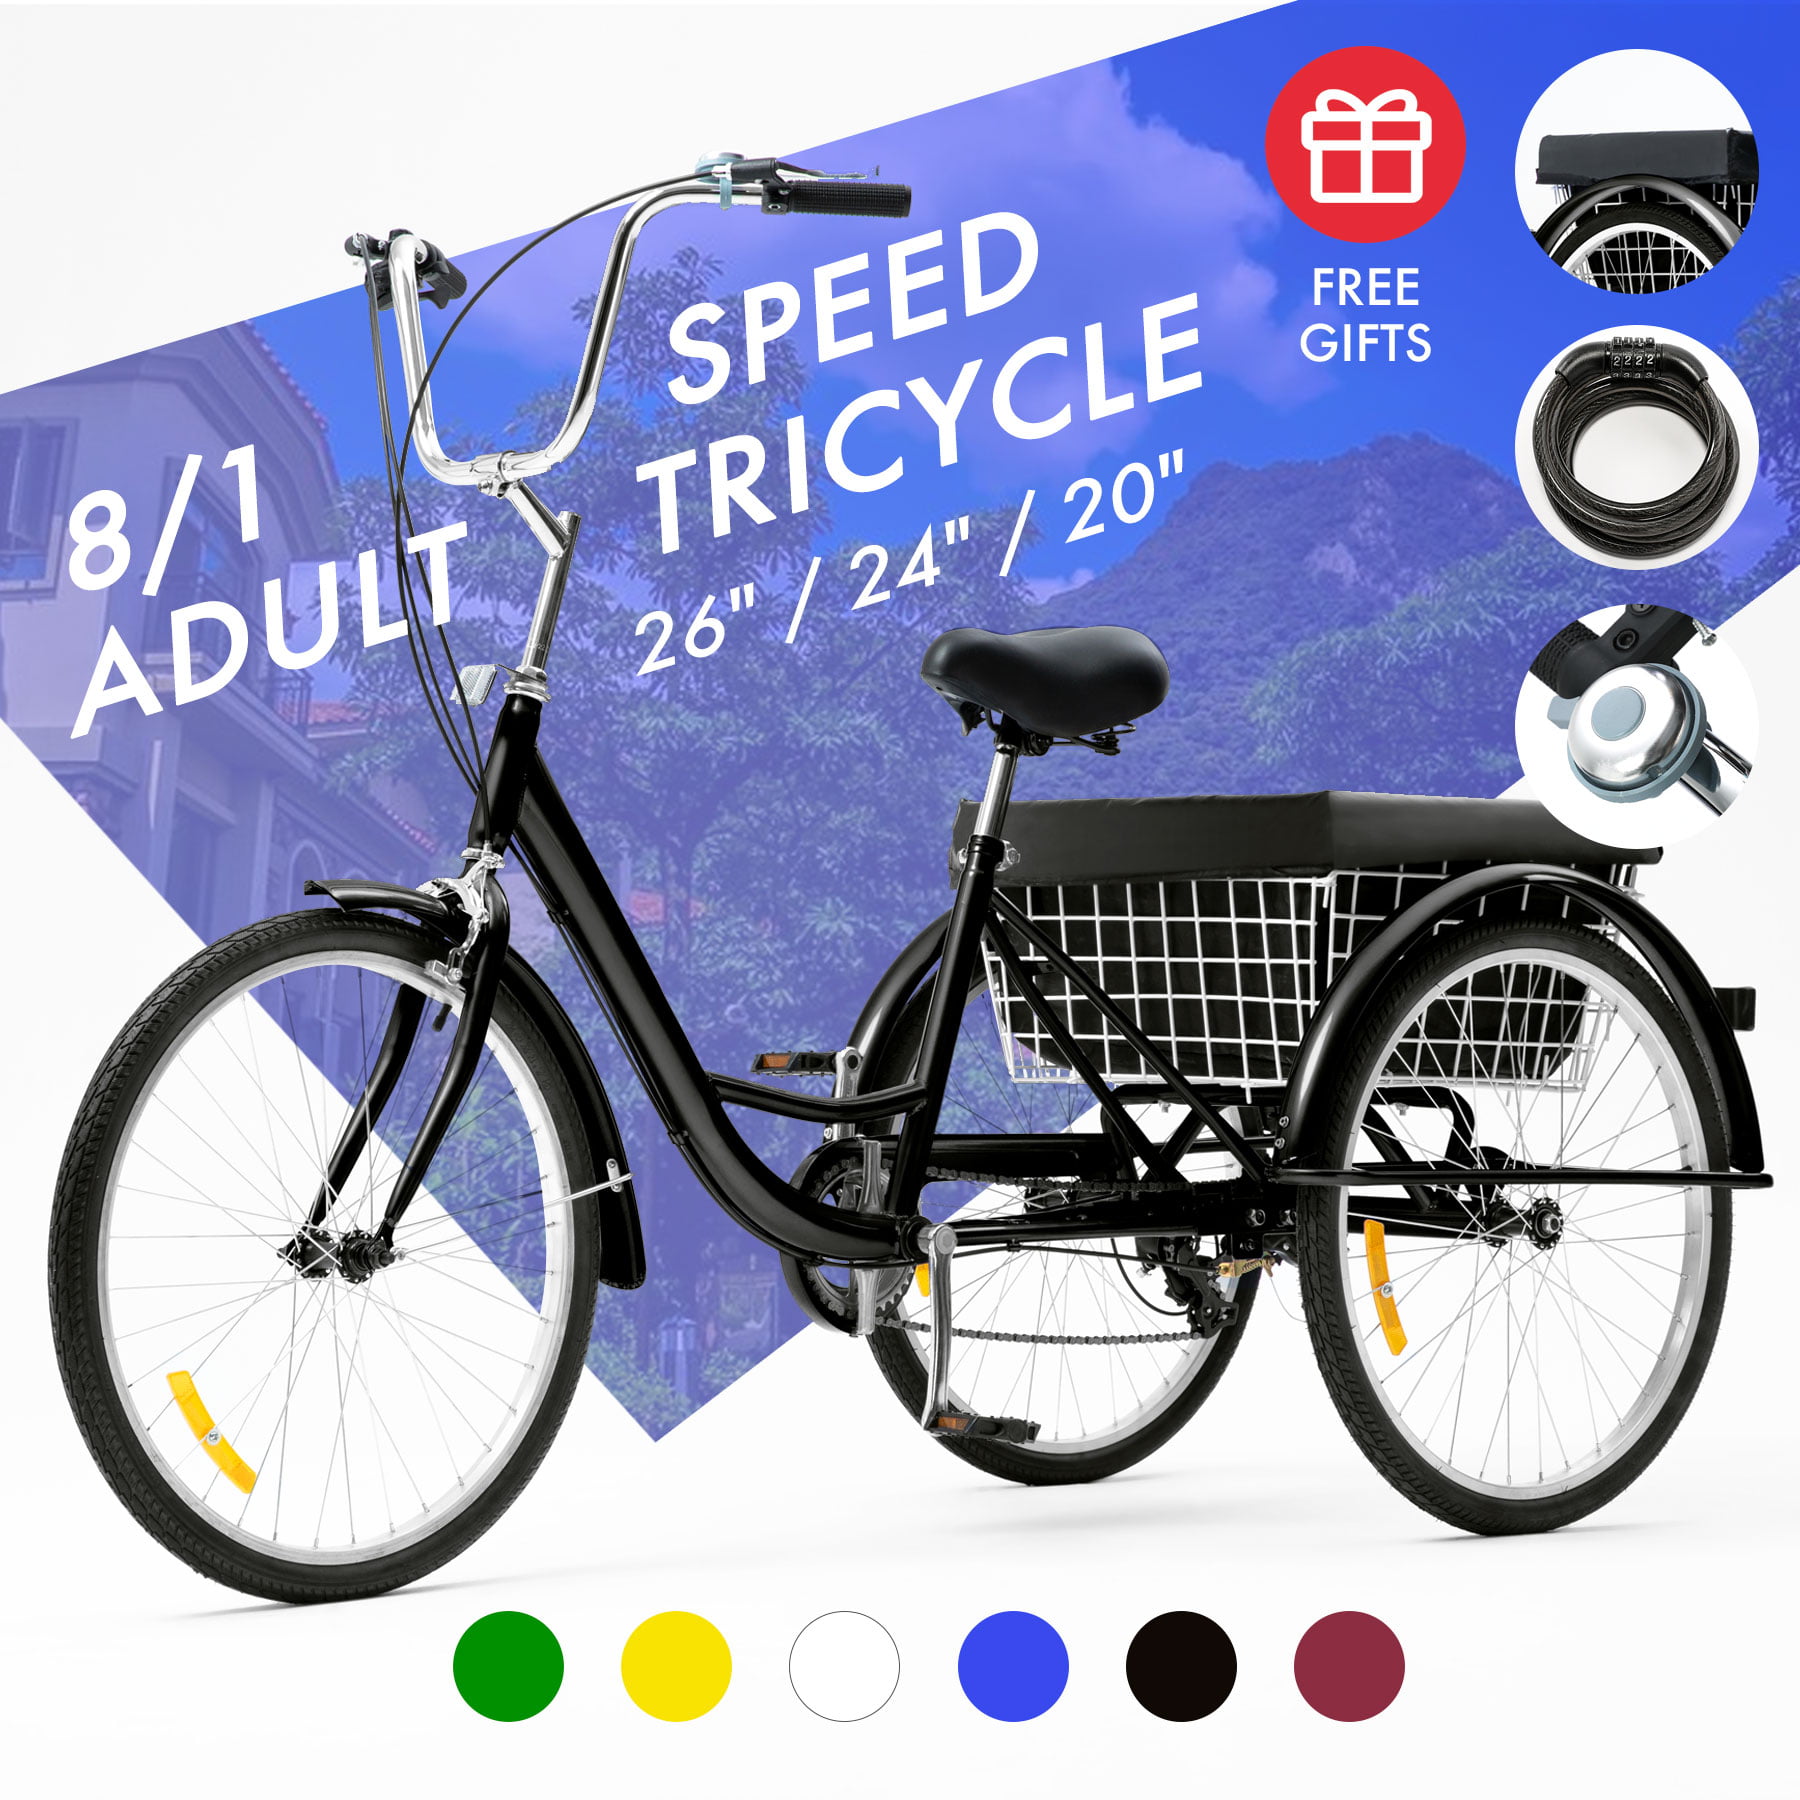 OU BEST CHOOSE 3 Wheel Adult Tricycle for Shopping Outdoor Picnic Sports Cruise Bicycle with Shopping Vegetable Basket Unique Gift 26 6 Speed Shift Trike Pedal Cycling Bike